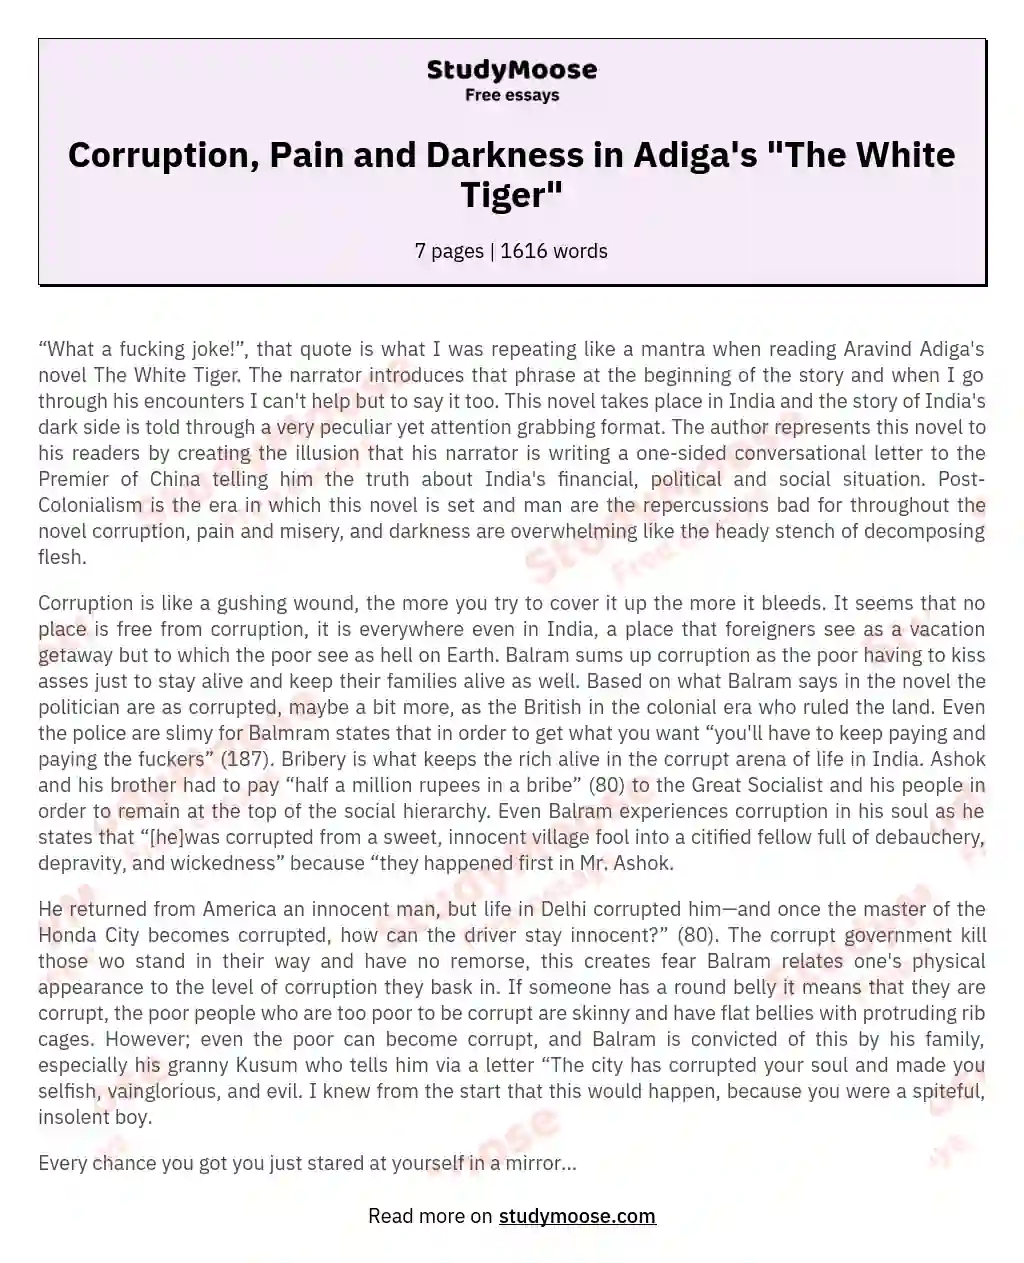 Corruption, Pain and Darkness in Adiga's "The White Tiger" essay